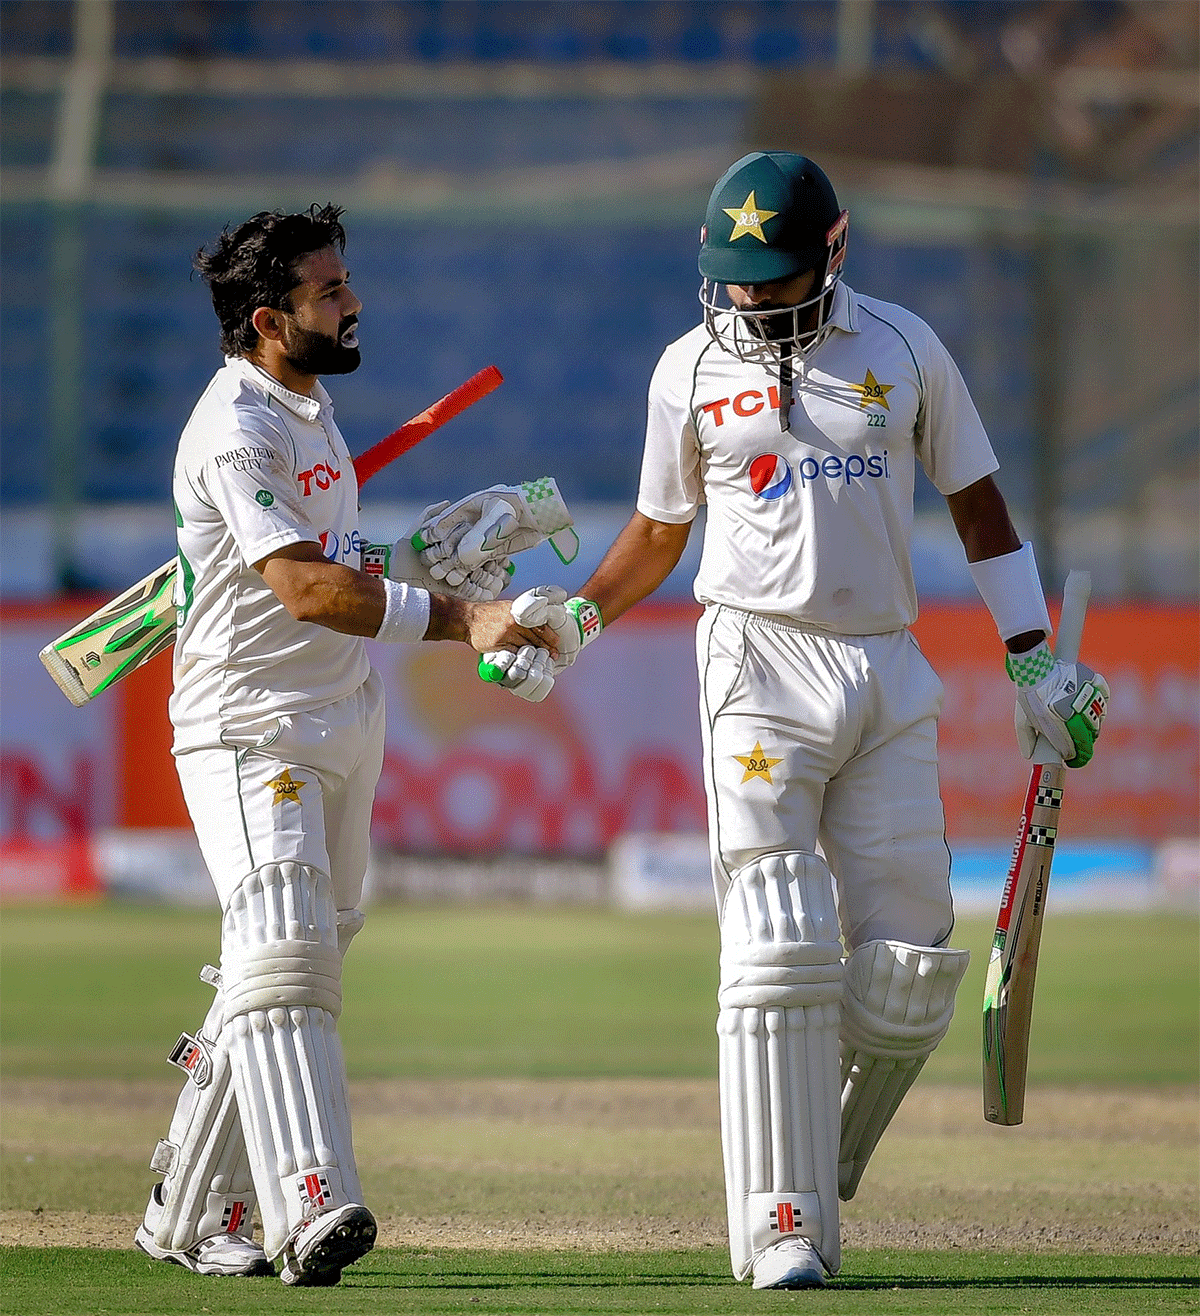 Mohammad Rizwan, who scored an unbeaten 104, congratulates Babar Azam on completing his 150 on Day 5 of the 2nd Test in Karachi on Wednesday